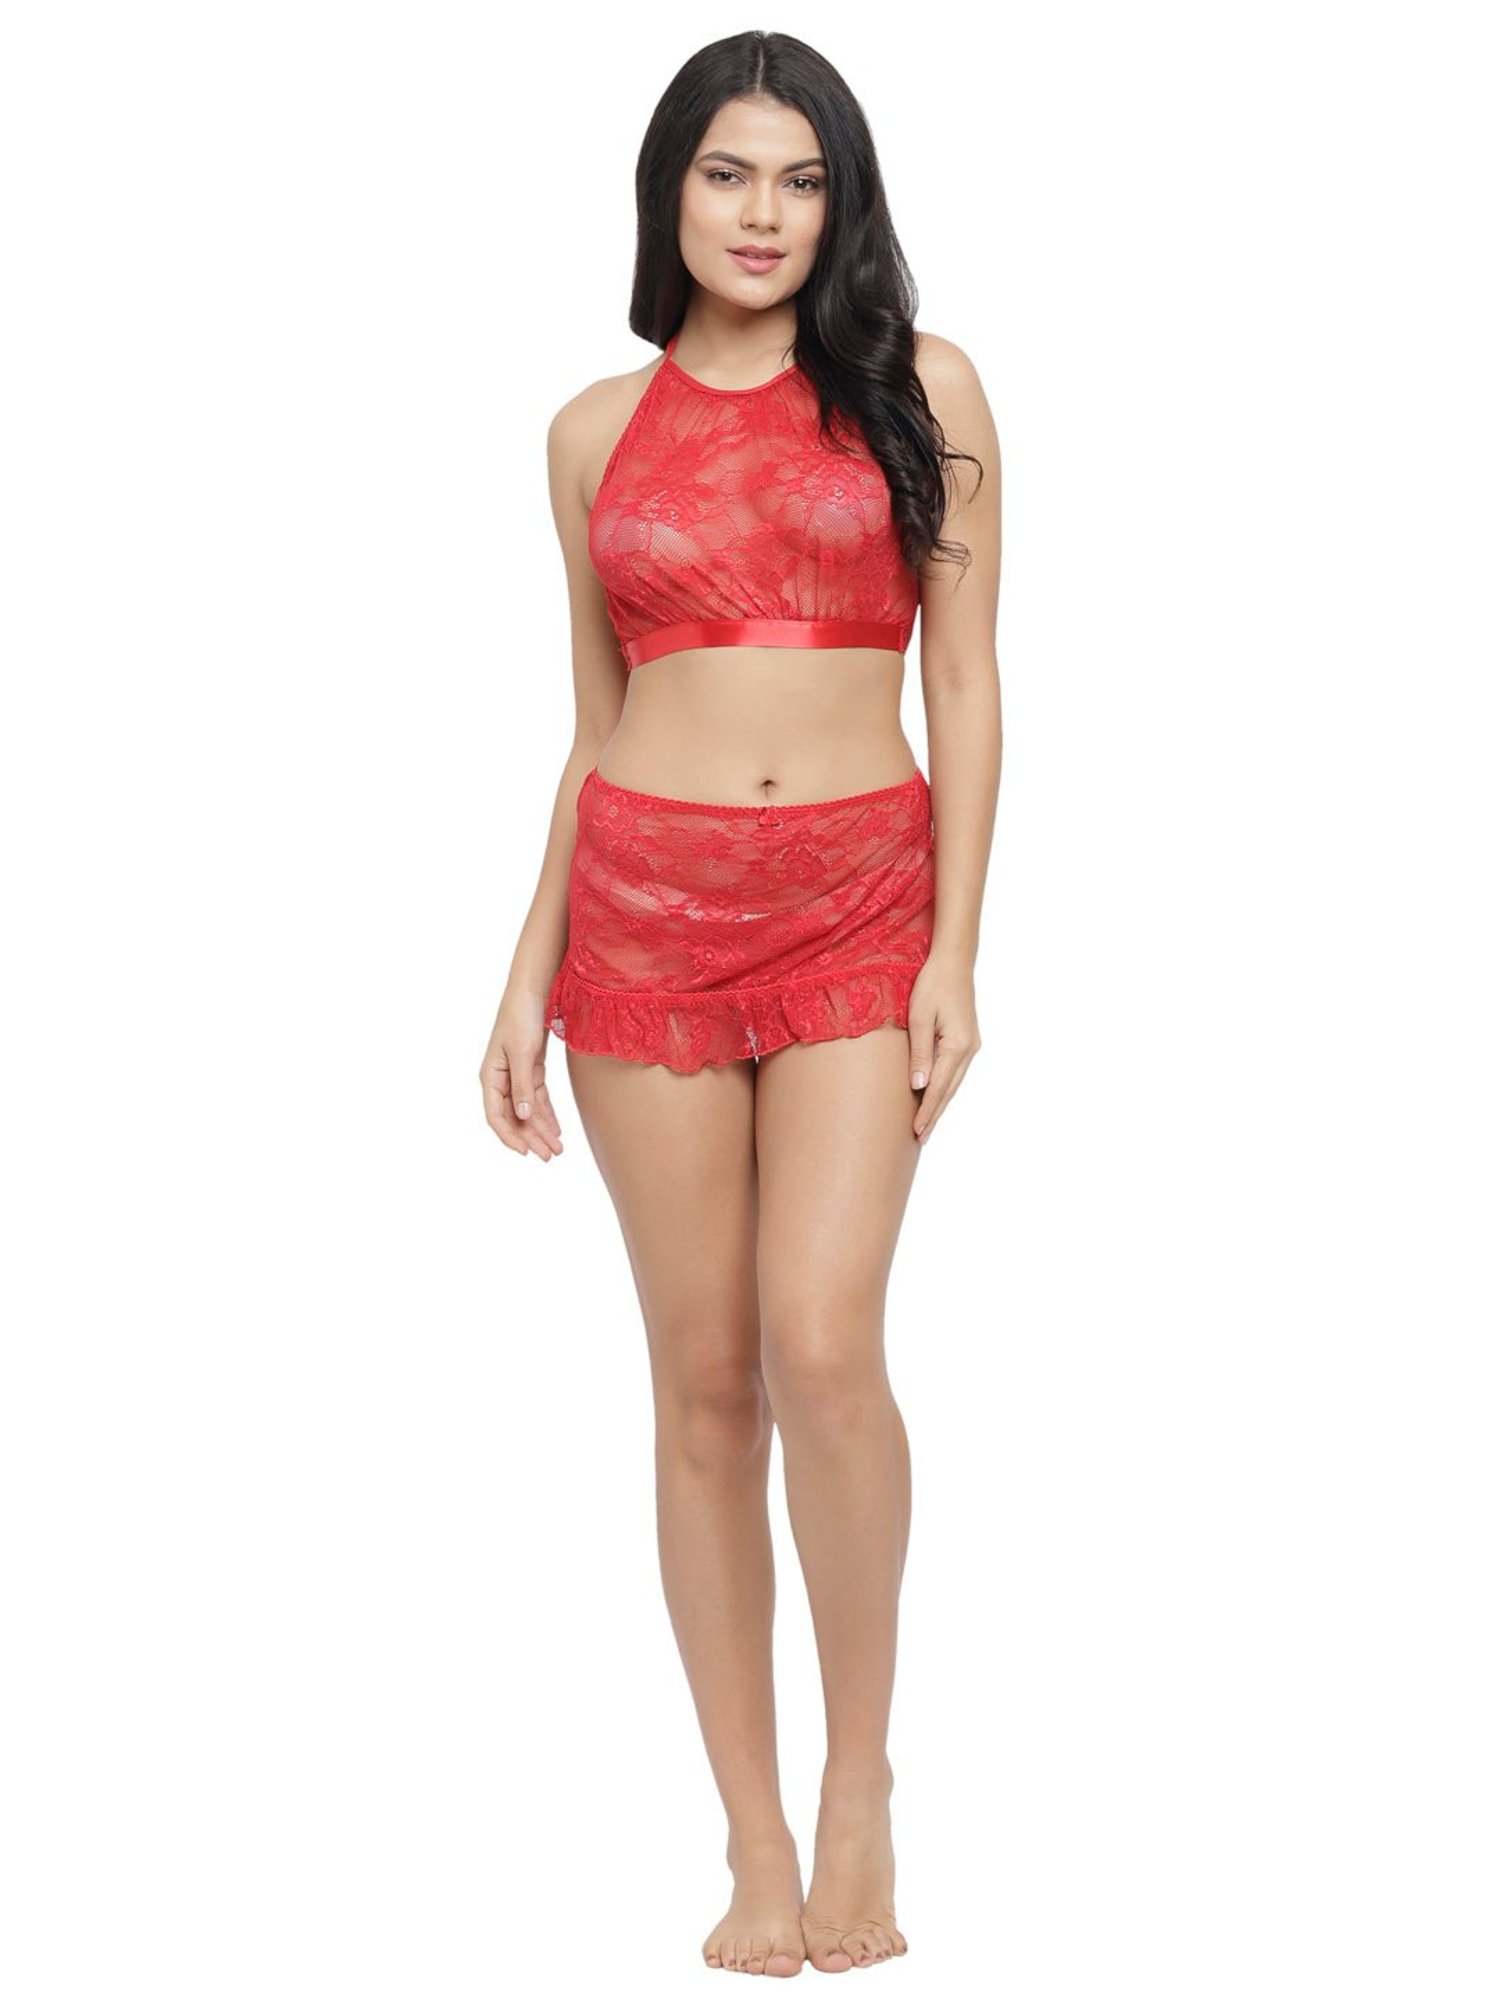 Buy Ira Soleil Red Lace Pattern Lingerie Set for Women Online @ Tata CLiQ